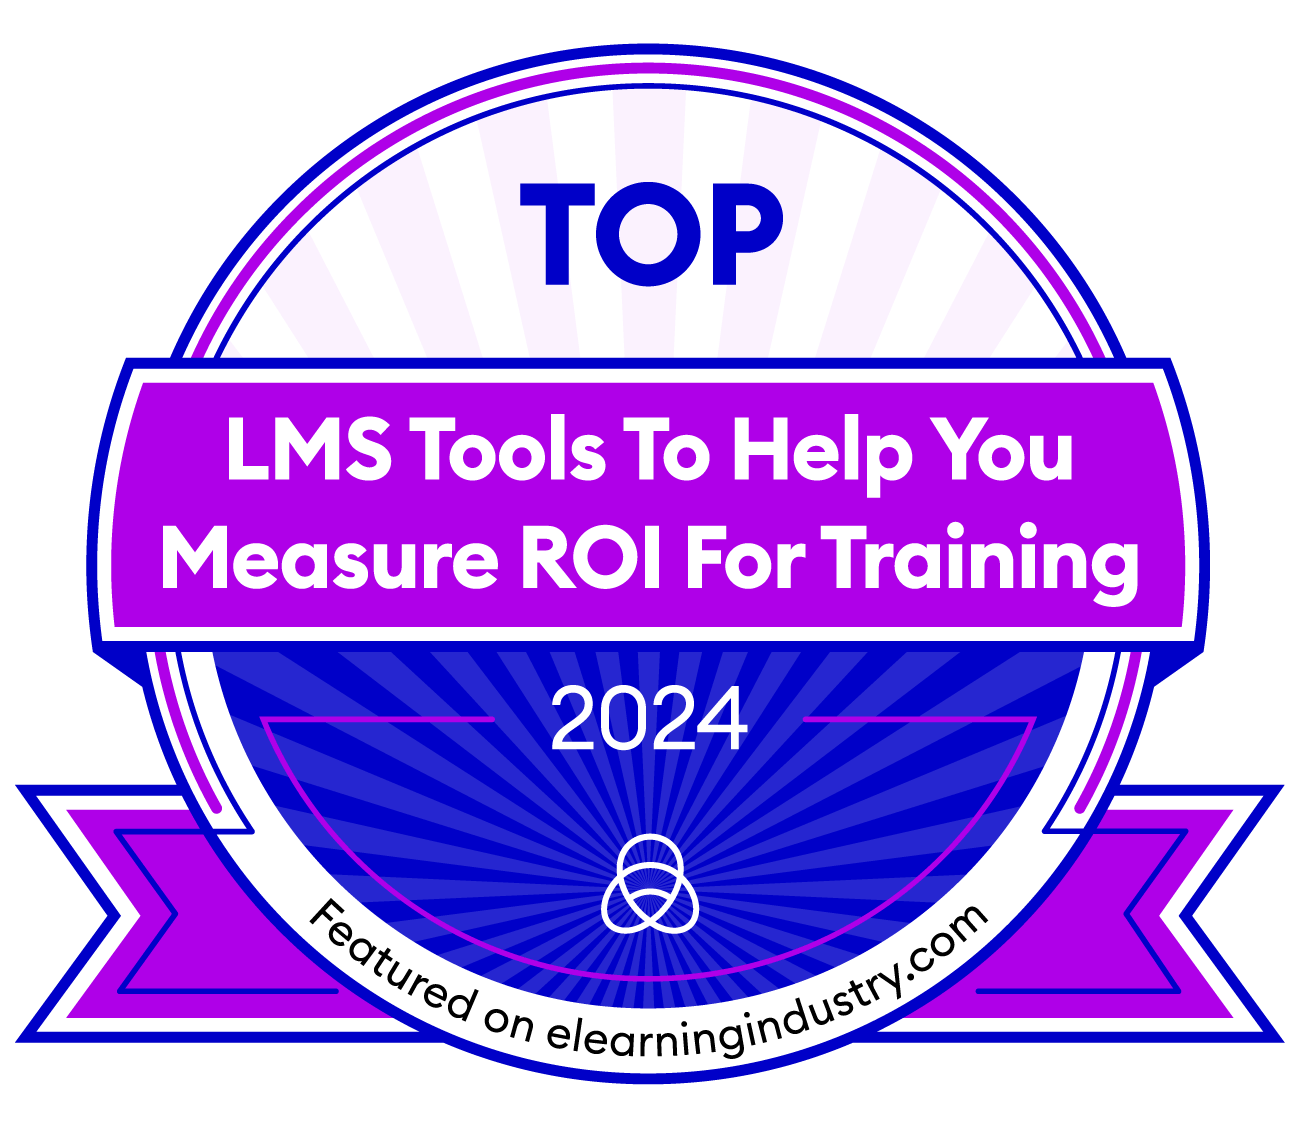 Top LMS Tools To Help You Measure ROI For Training 2024